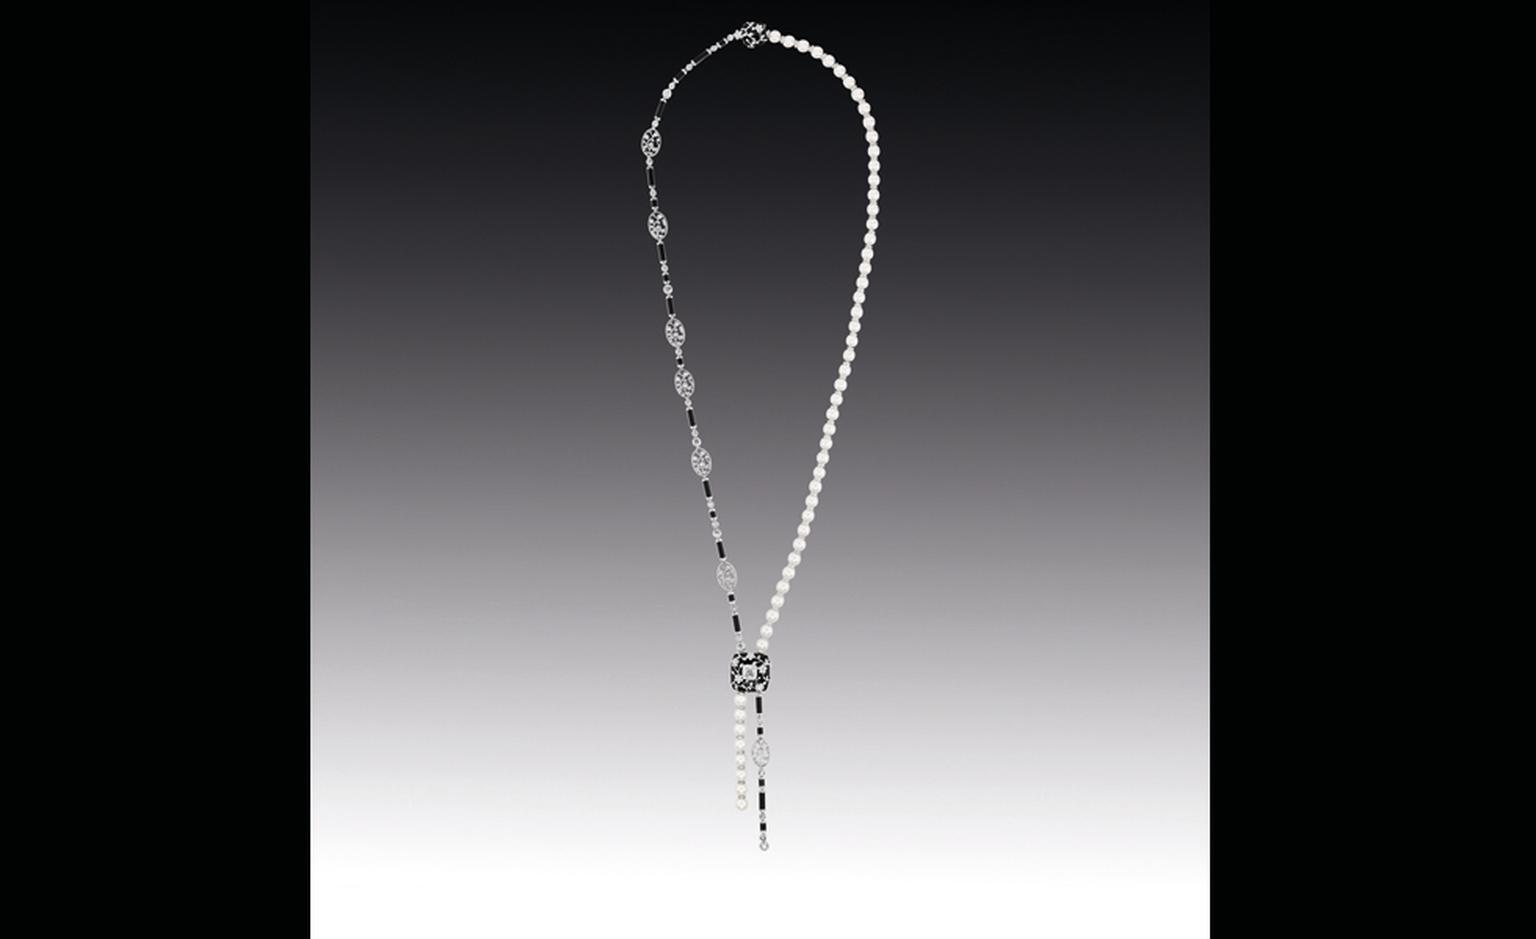 Chanel Contrastes collection: Collier Ombre de Charme. Necklace in white gold, diamonds, pearls, rock crystals and onyx.